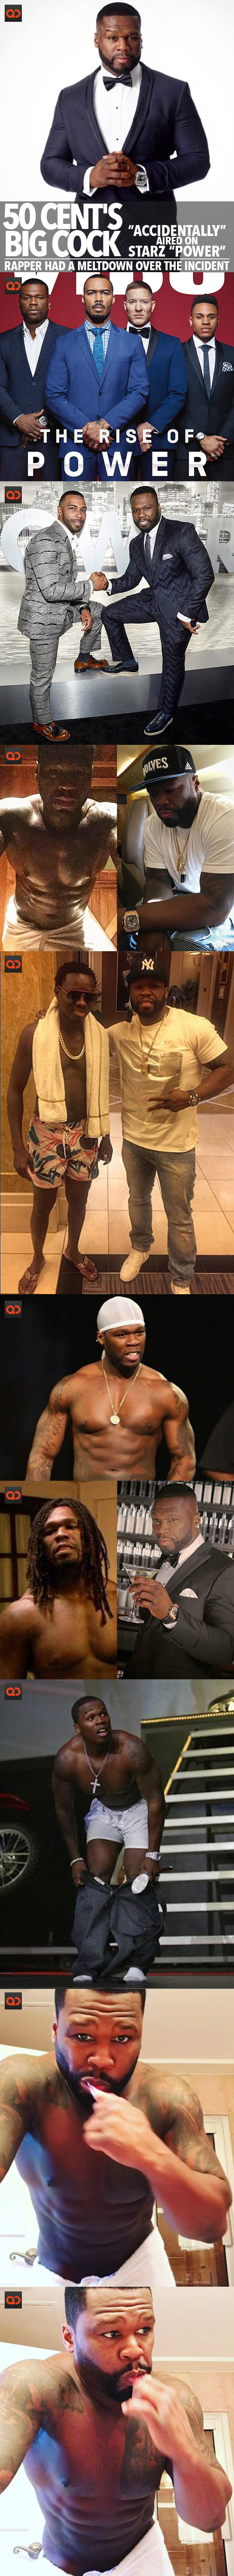 50 Cent's Big Cock Got “Accidentally” Aired On Starz “Power” - Rapper Had A Meltdown Over The Incident